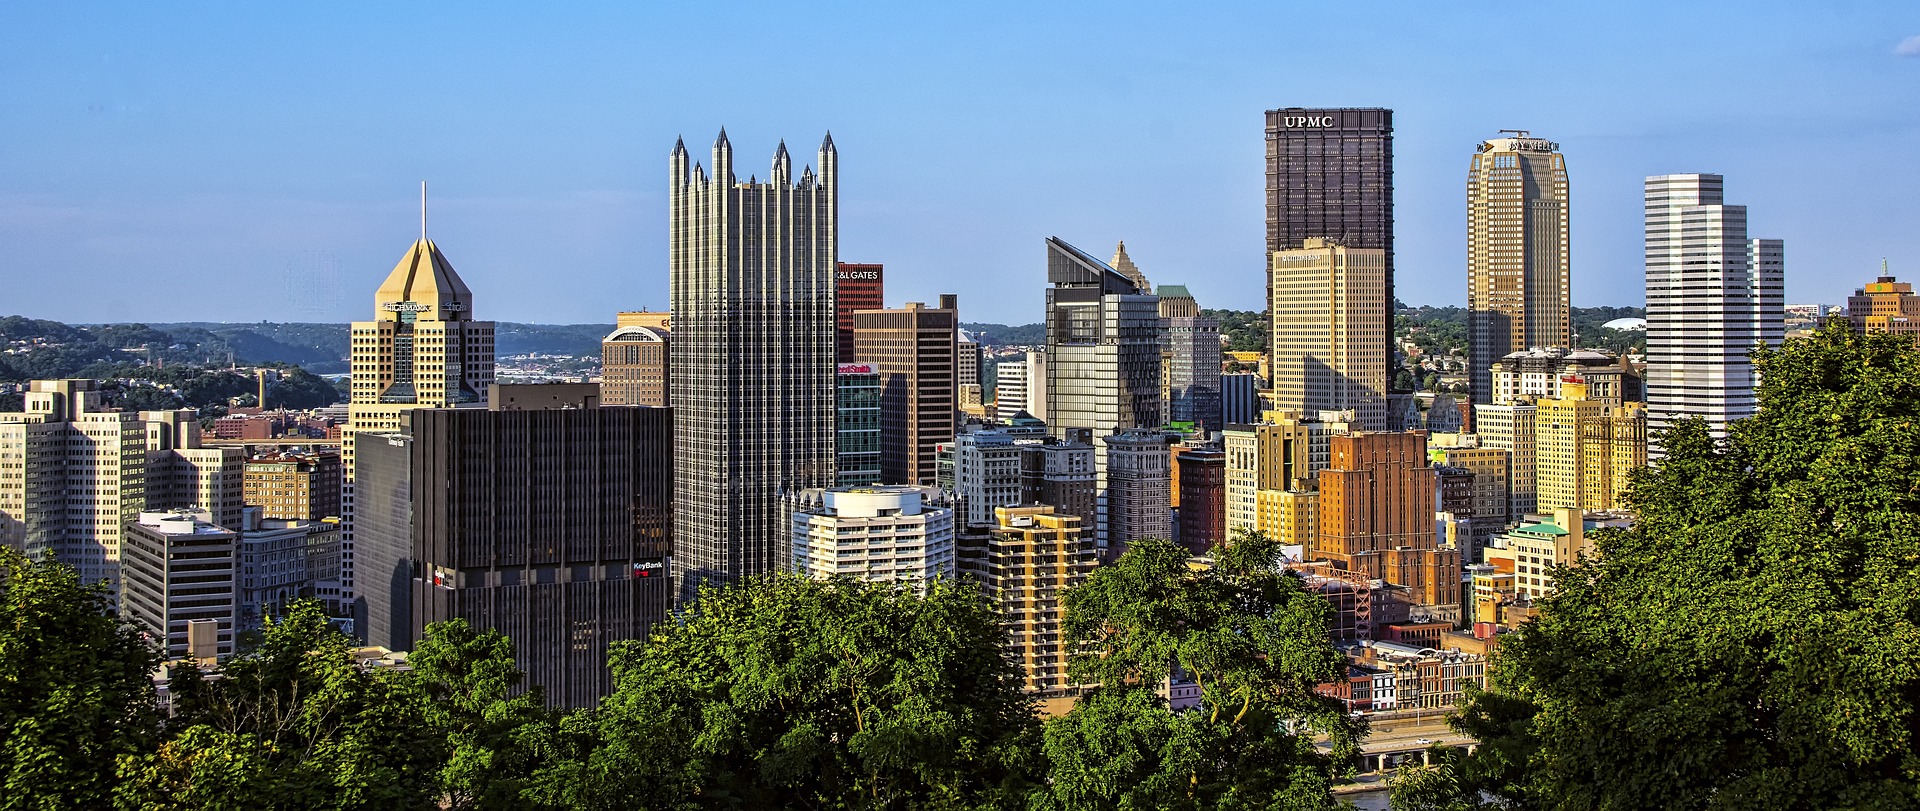 Pittsburgh offers funds for office-to-residential conversions. Image by Bruce Emmerling from Pixabay 